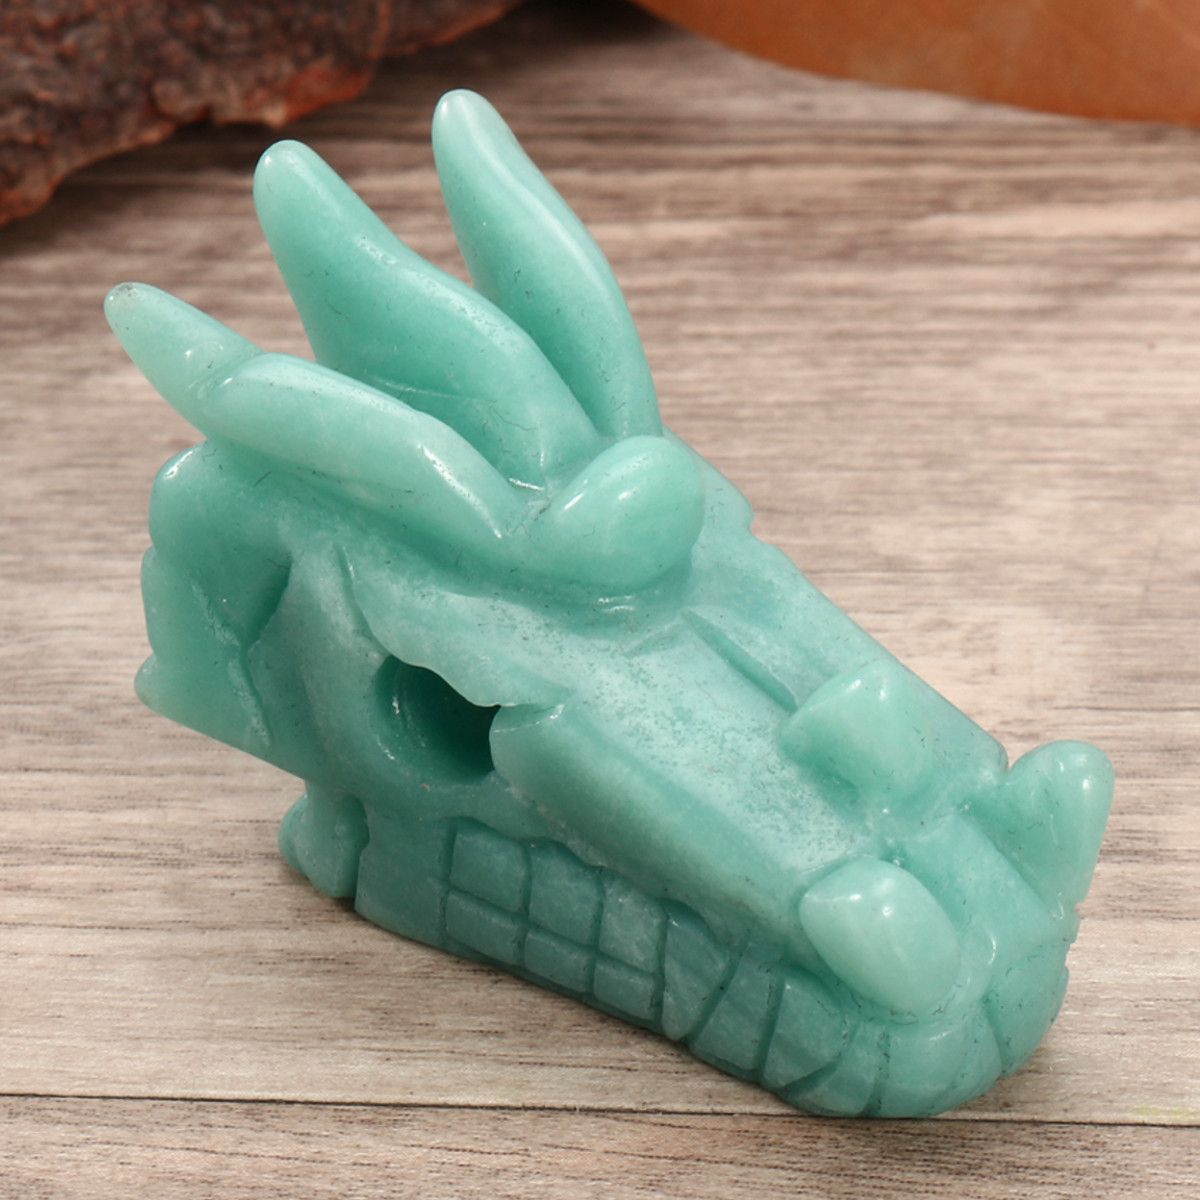 Hand-Carved-Crystal-4-Colors-Dragon-Skull-Specimens-Healing-Wand-Gemstones-Gift-Home-Decorations-1471012